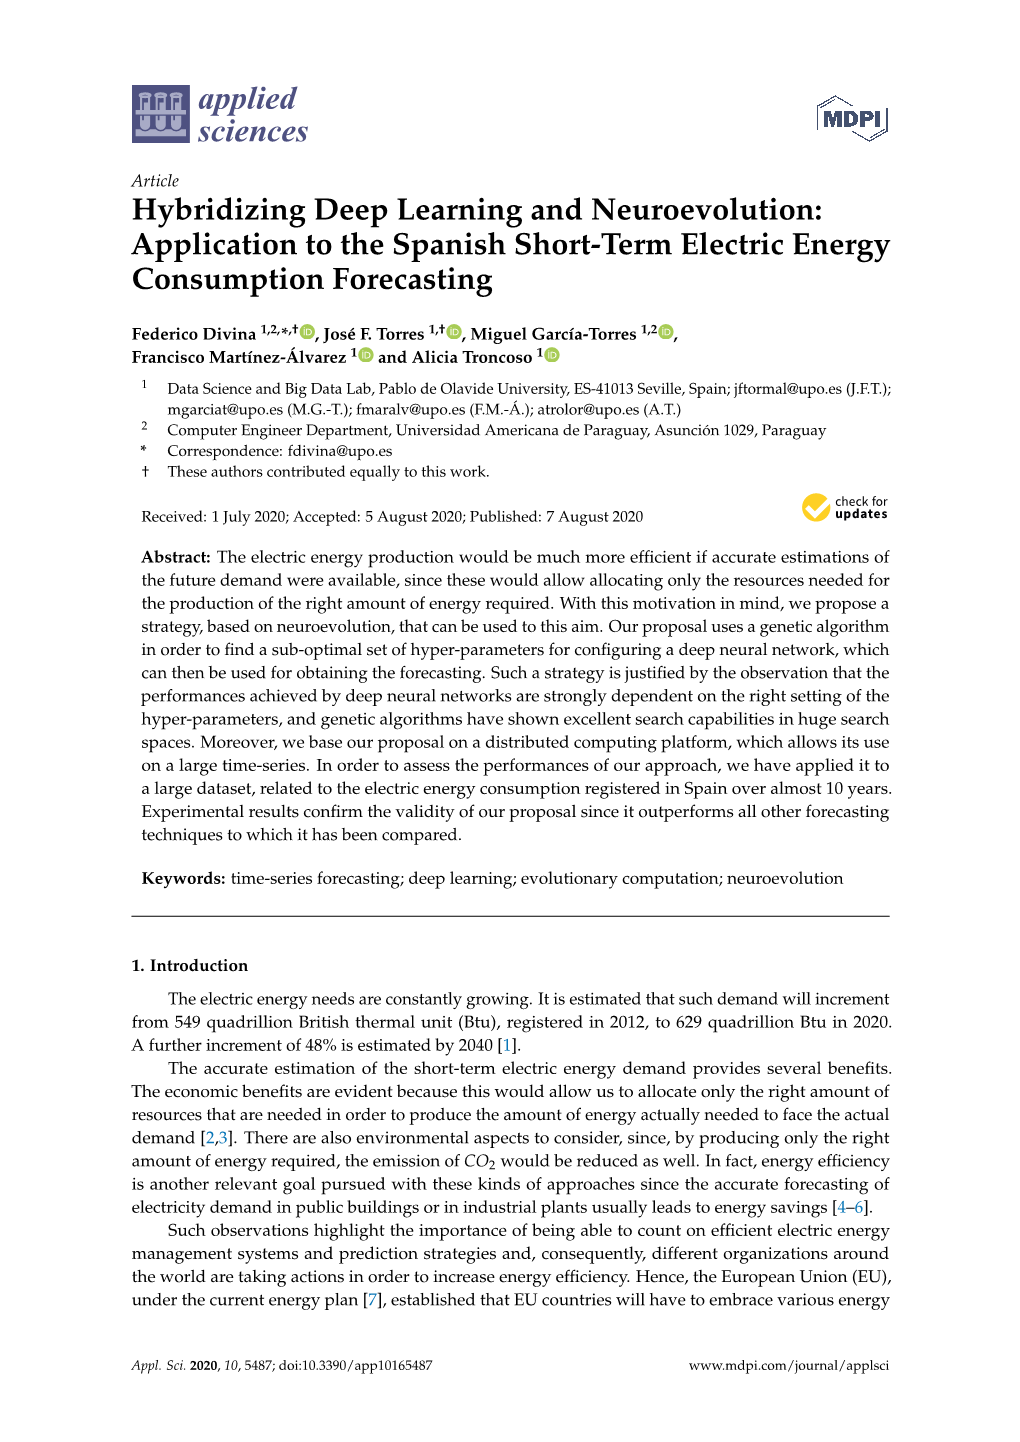 Hybridizing Deep Learning and Neuroevolution: Application to the Spanish Short-Term Electric Energy Consumption Forecasting